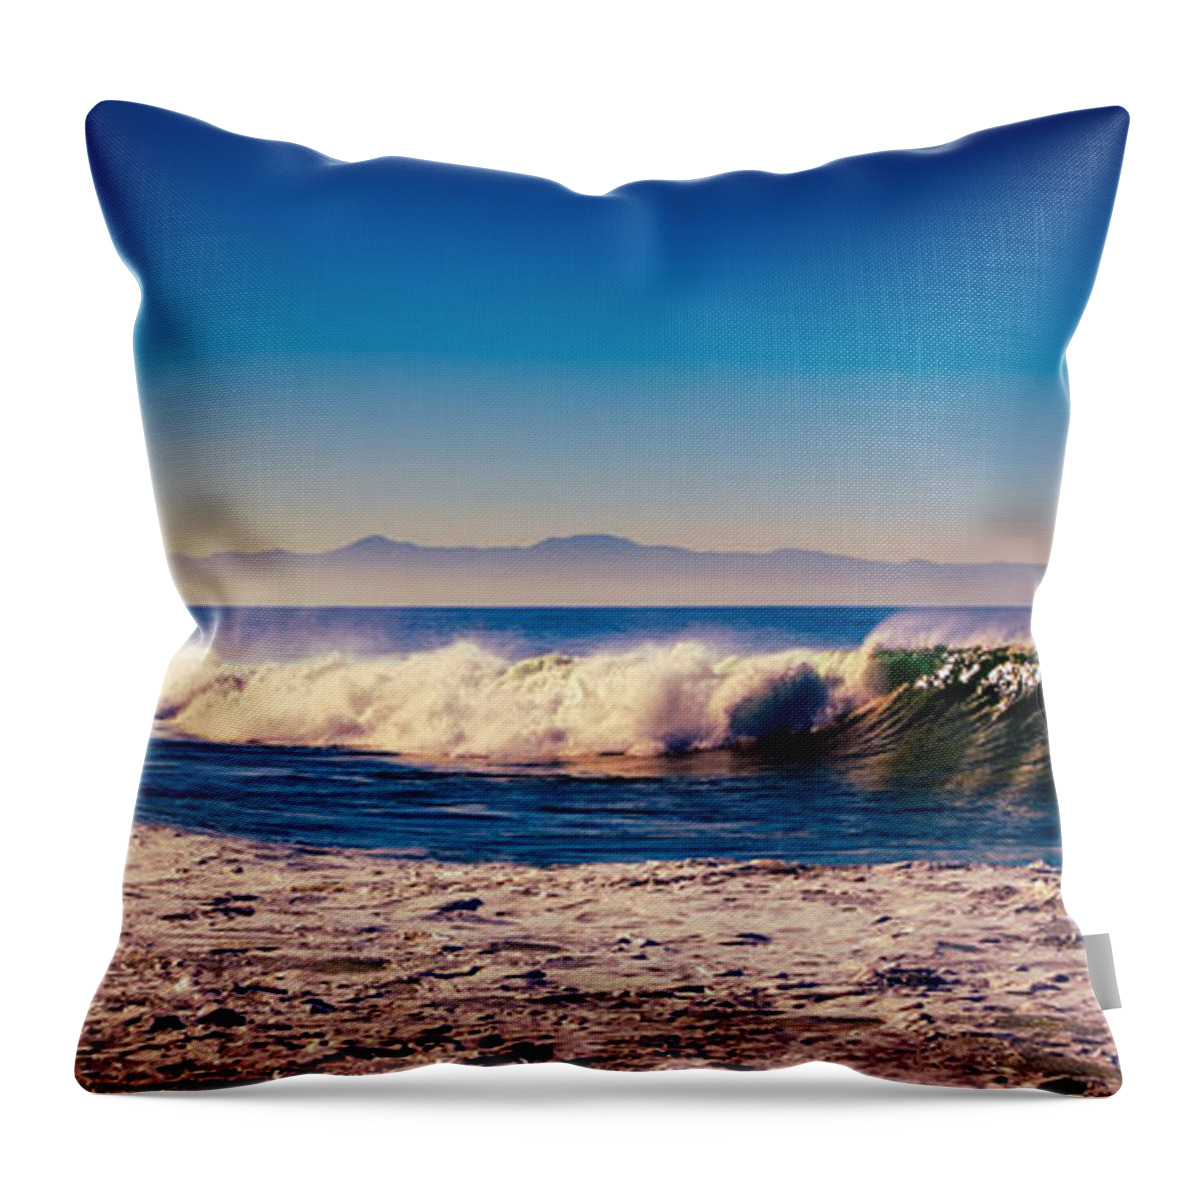 Bluffs Throw Pillow featuring the photograph Fazed Bluff by Mike-Hope by Mike-Hope